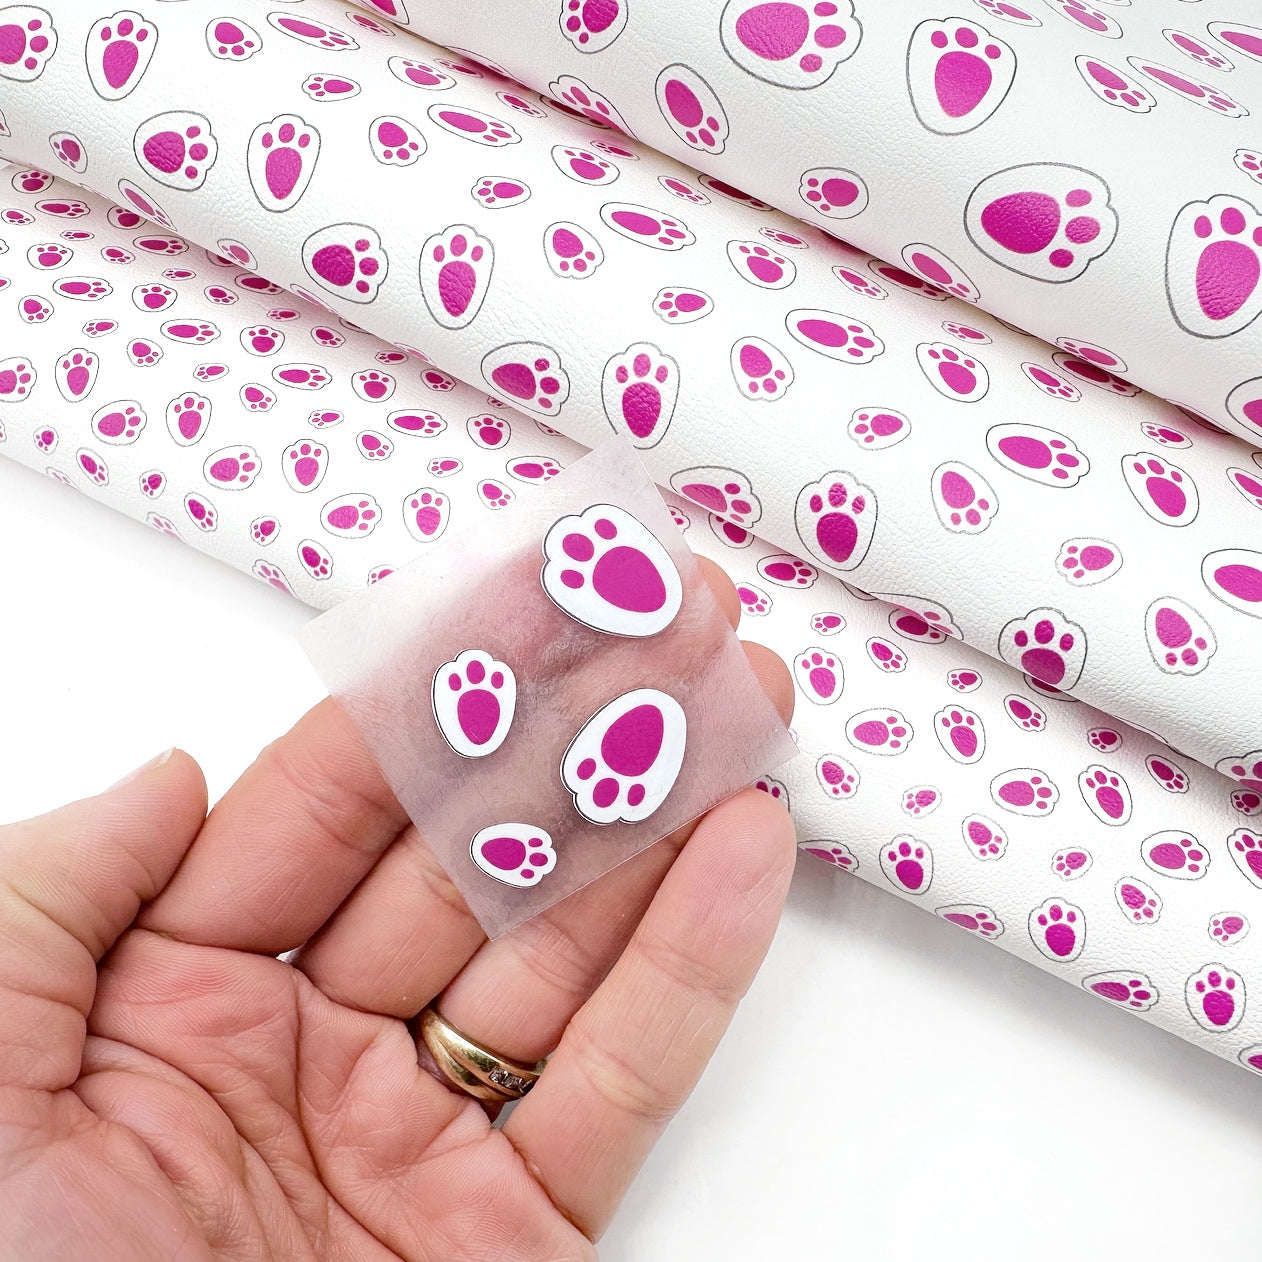 Exclusive Printed Bunny Paws HTV Iron on Bow Transfers- SET of 4